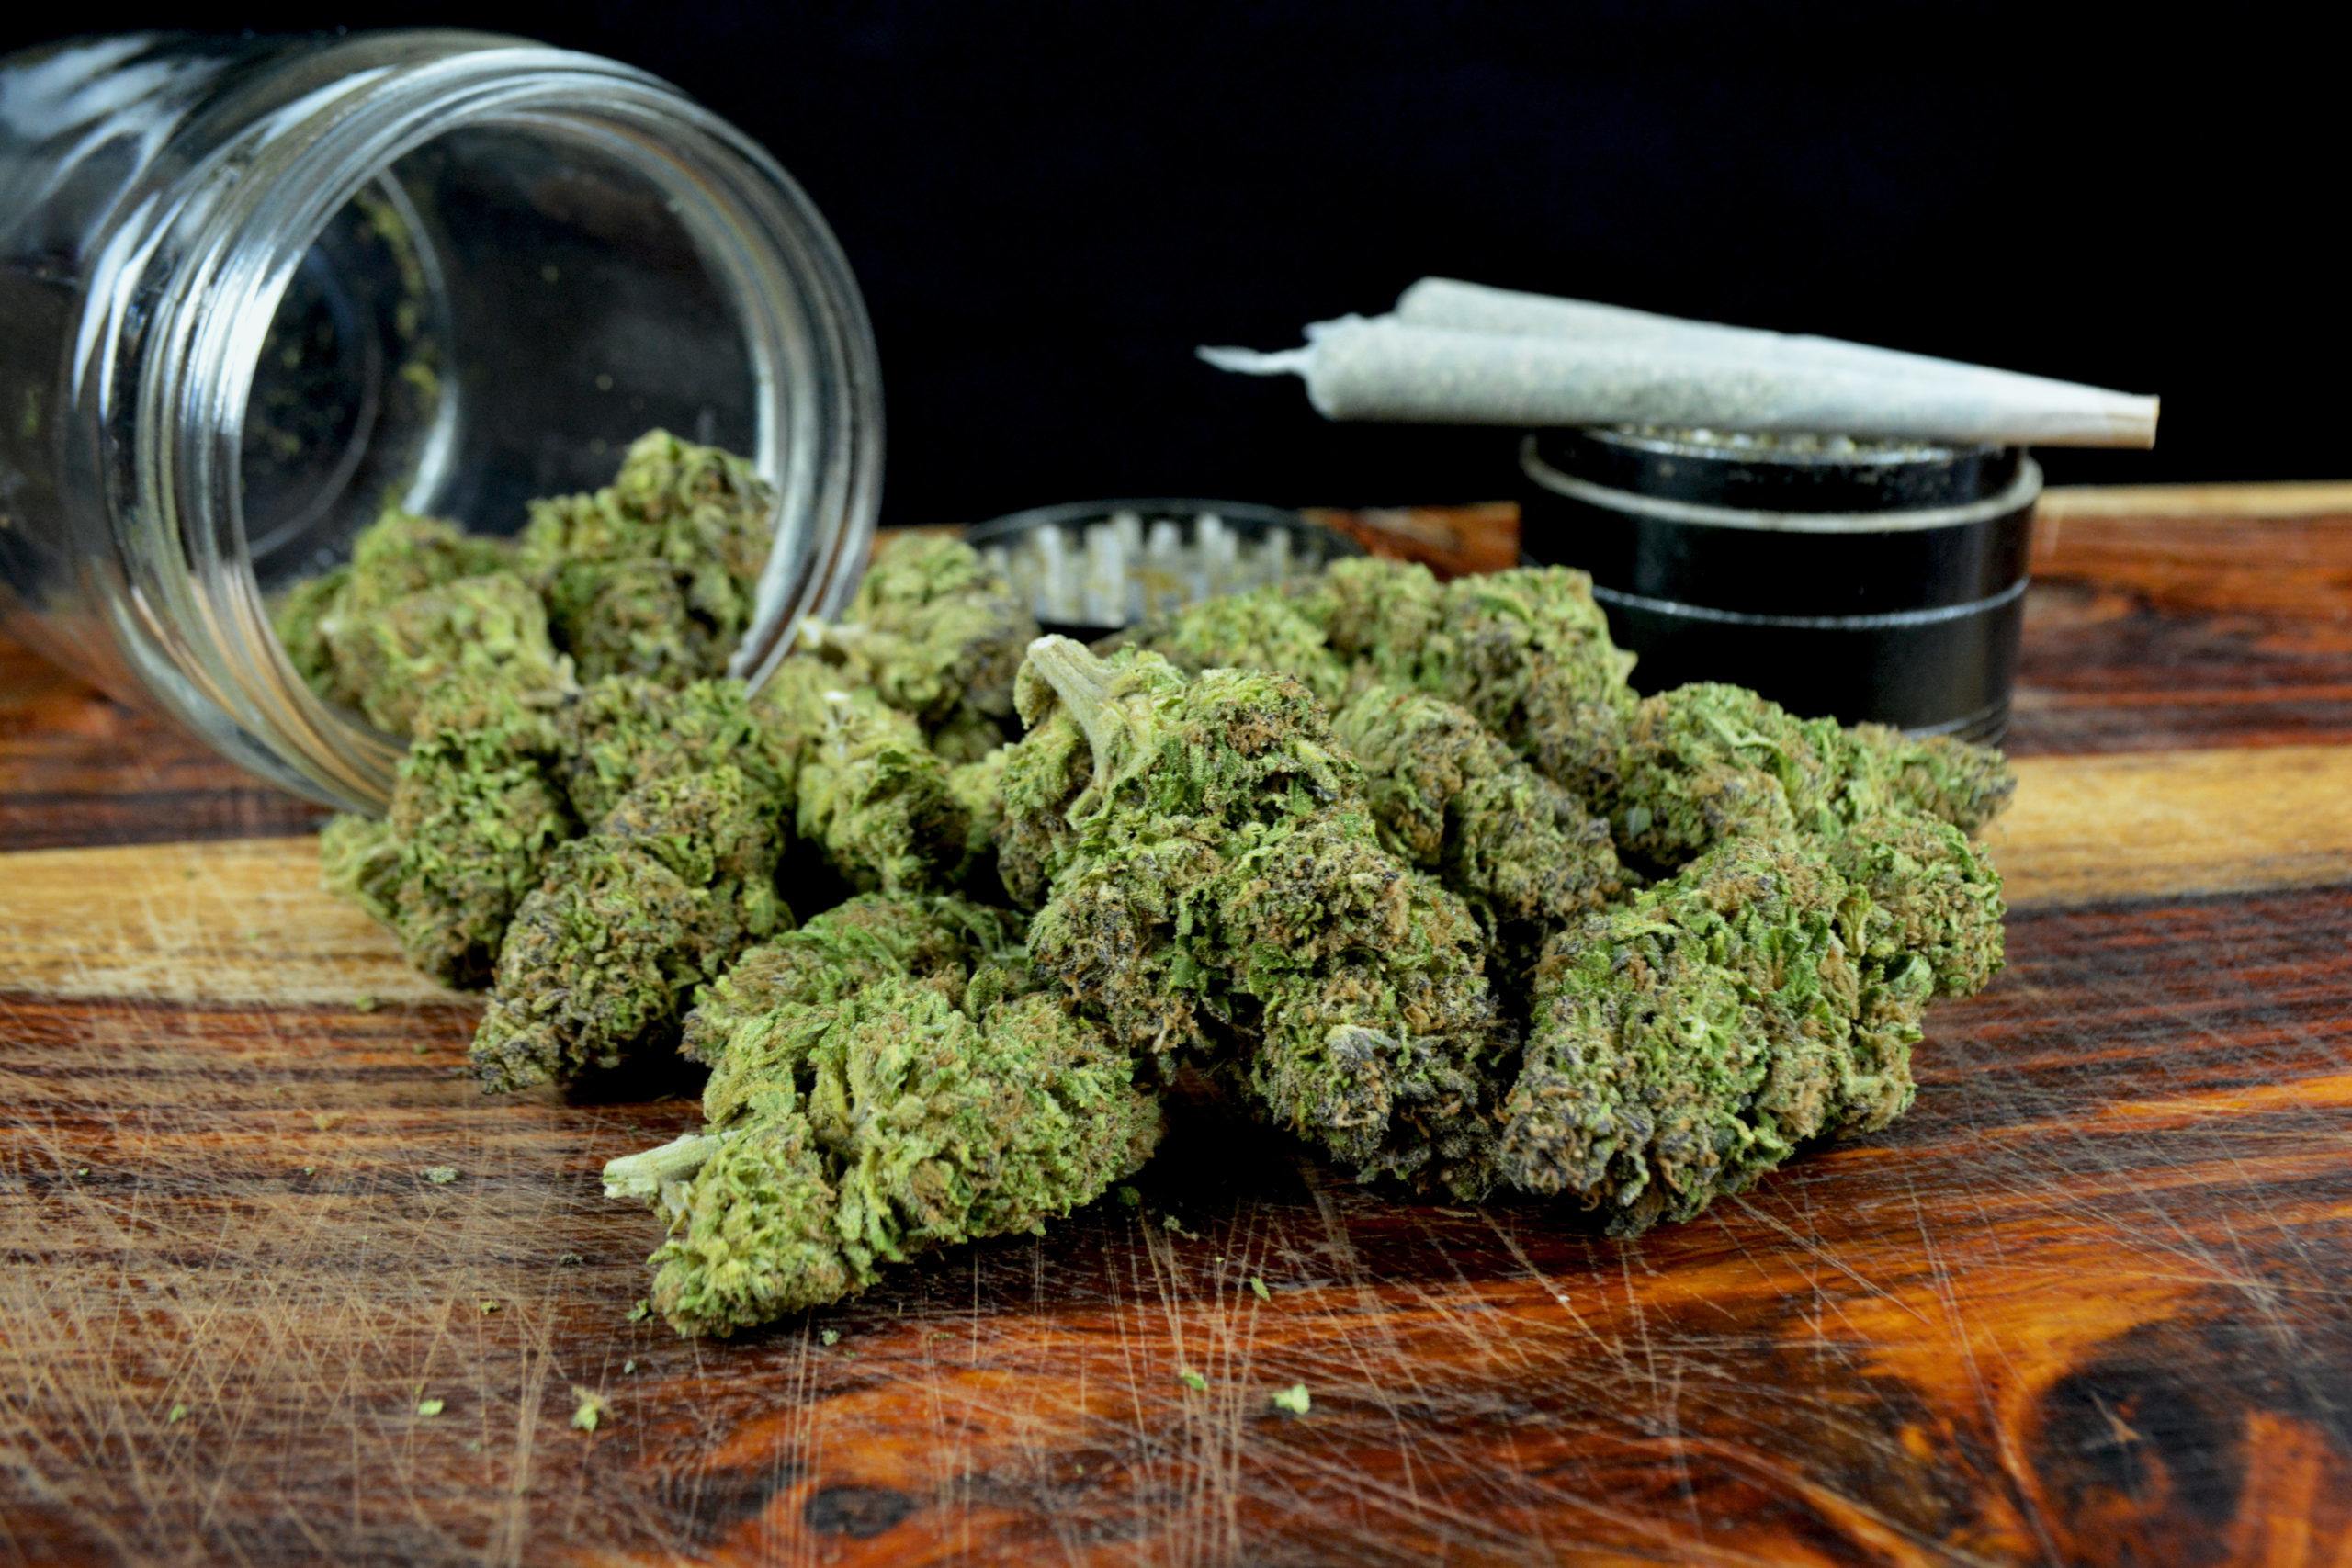 One ounce marijuana with jar, joints and grinder against black background